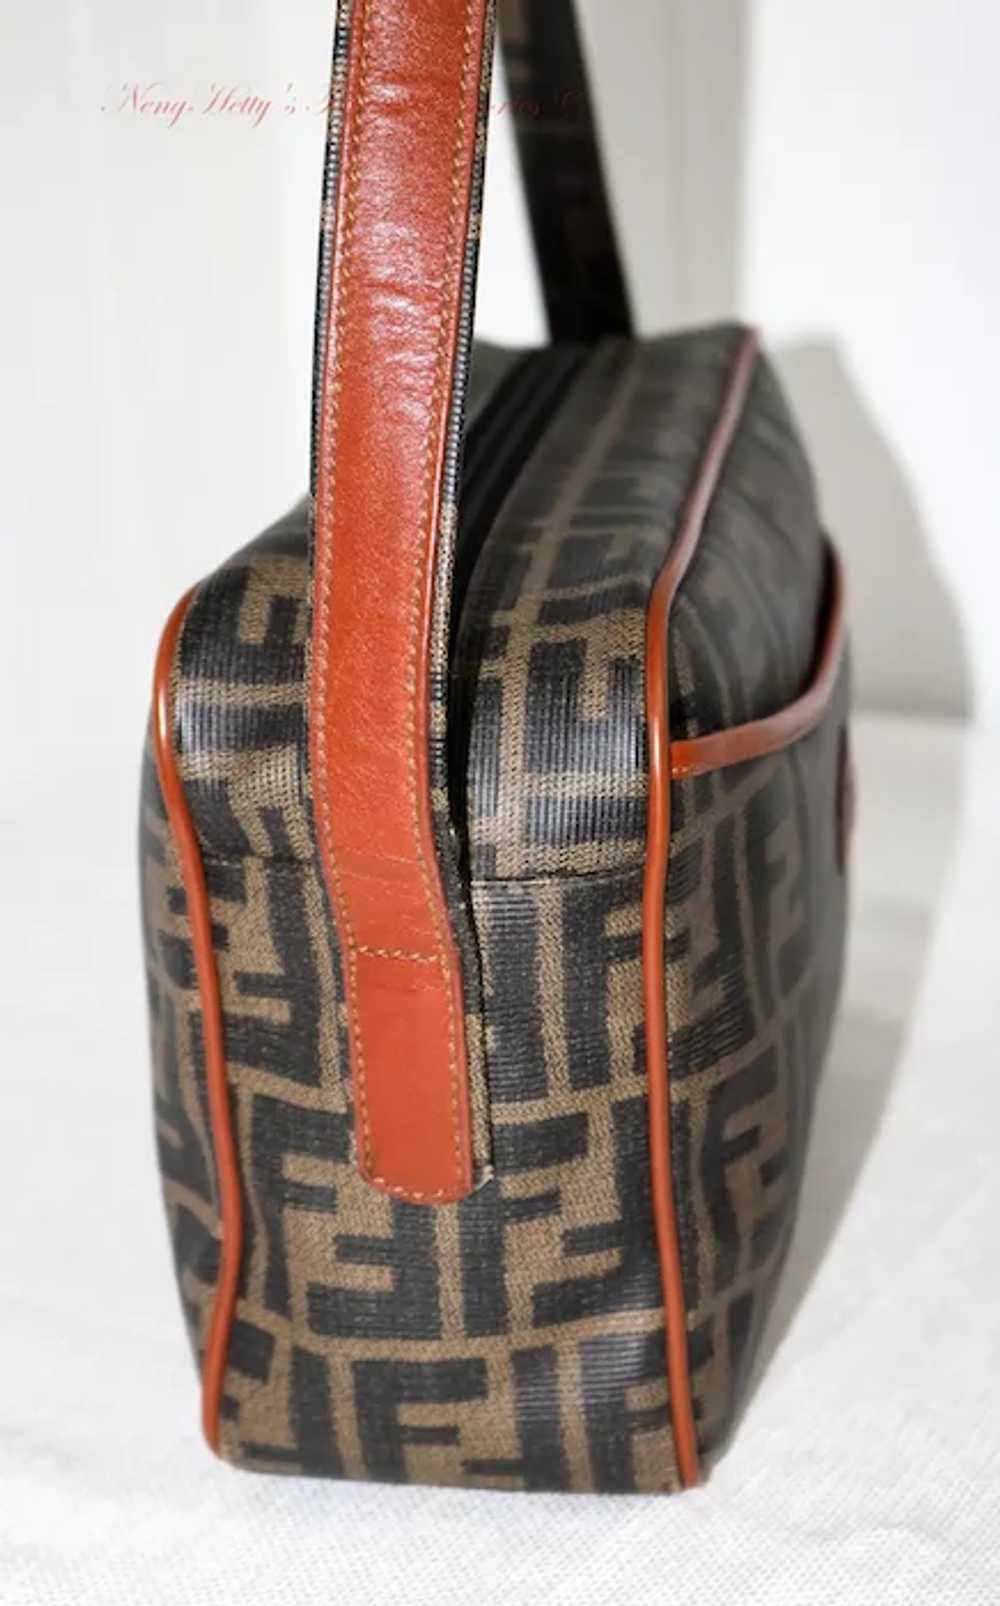 Vintage Fendi Roma Zucca Shoulder Bag from Italy - image 3